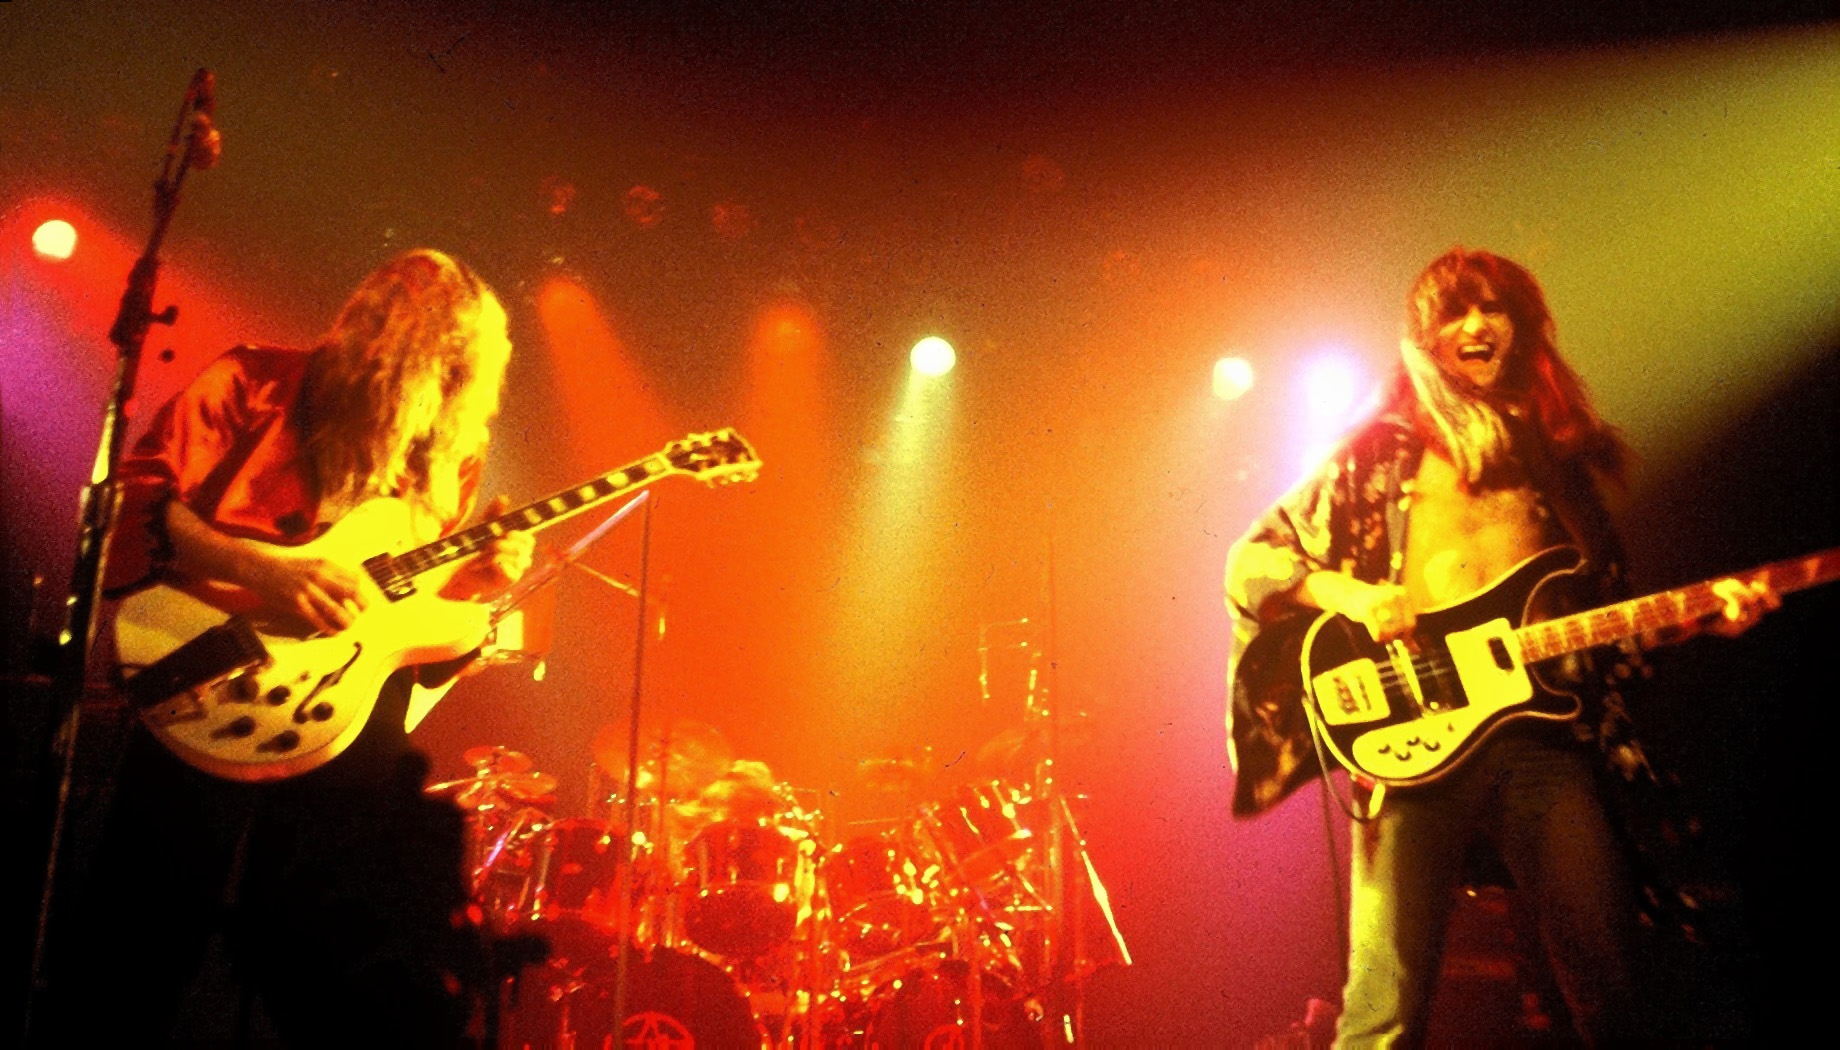 Rush 'A Farewell to Kings' Tour Pictures - Maple Leaf Gardens - Toronto, Ontario - December 29th, 1977